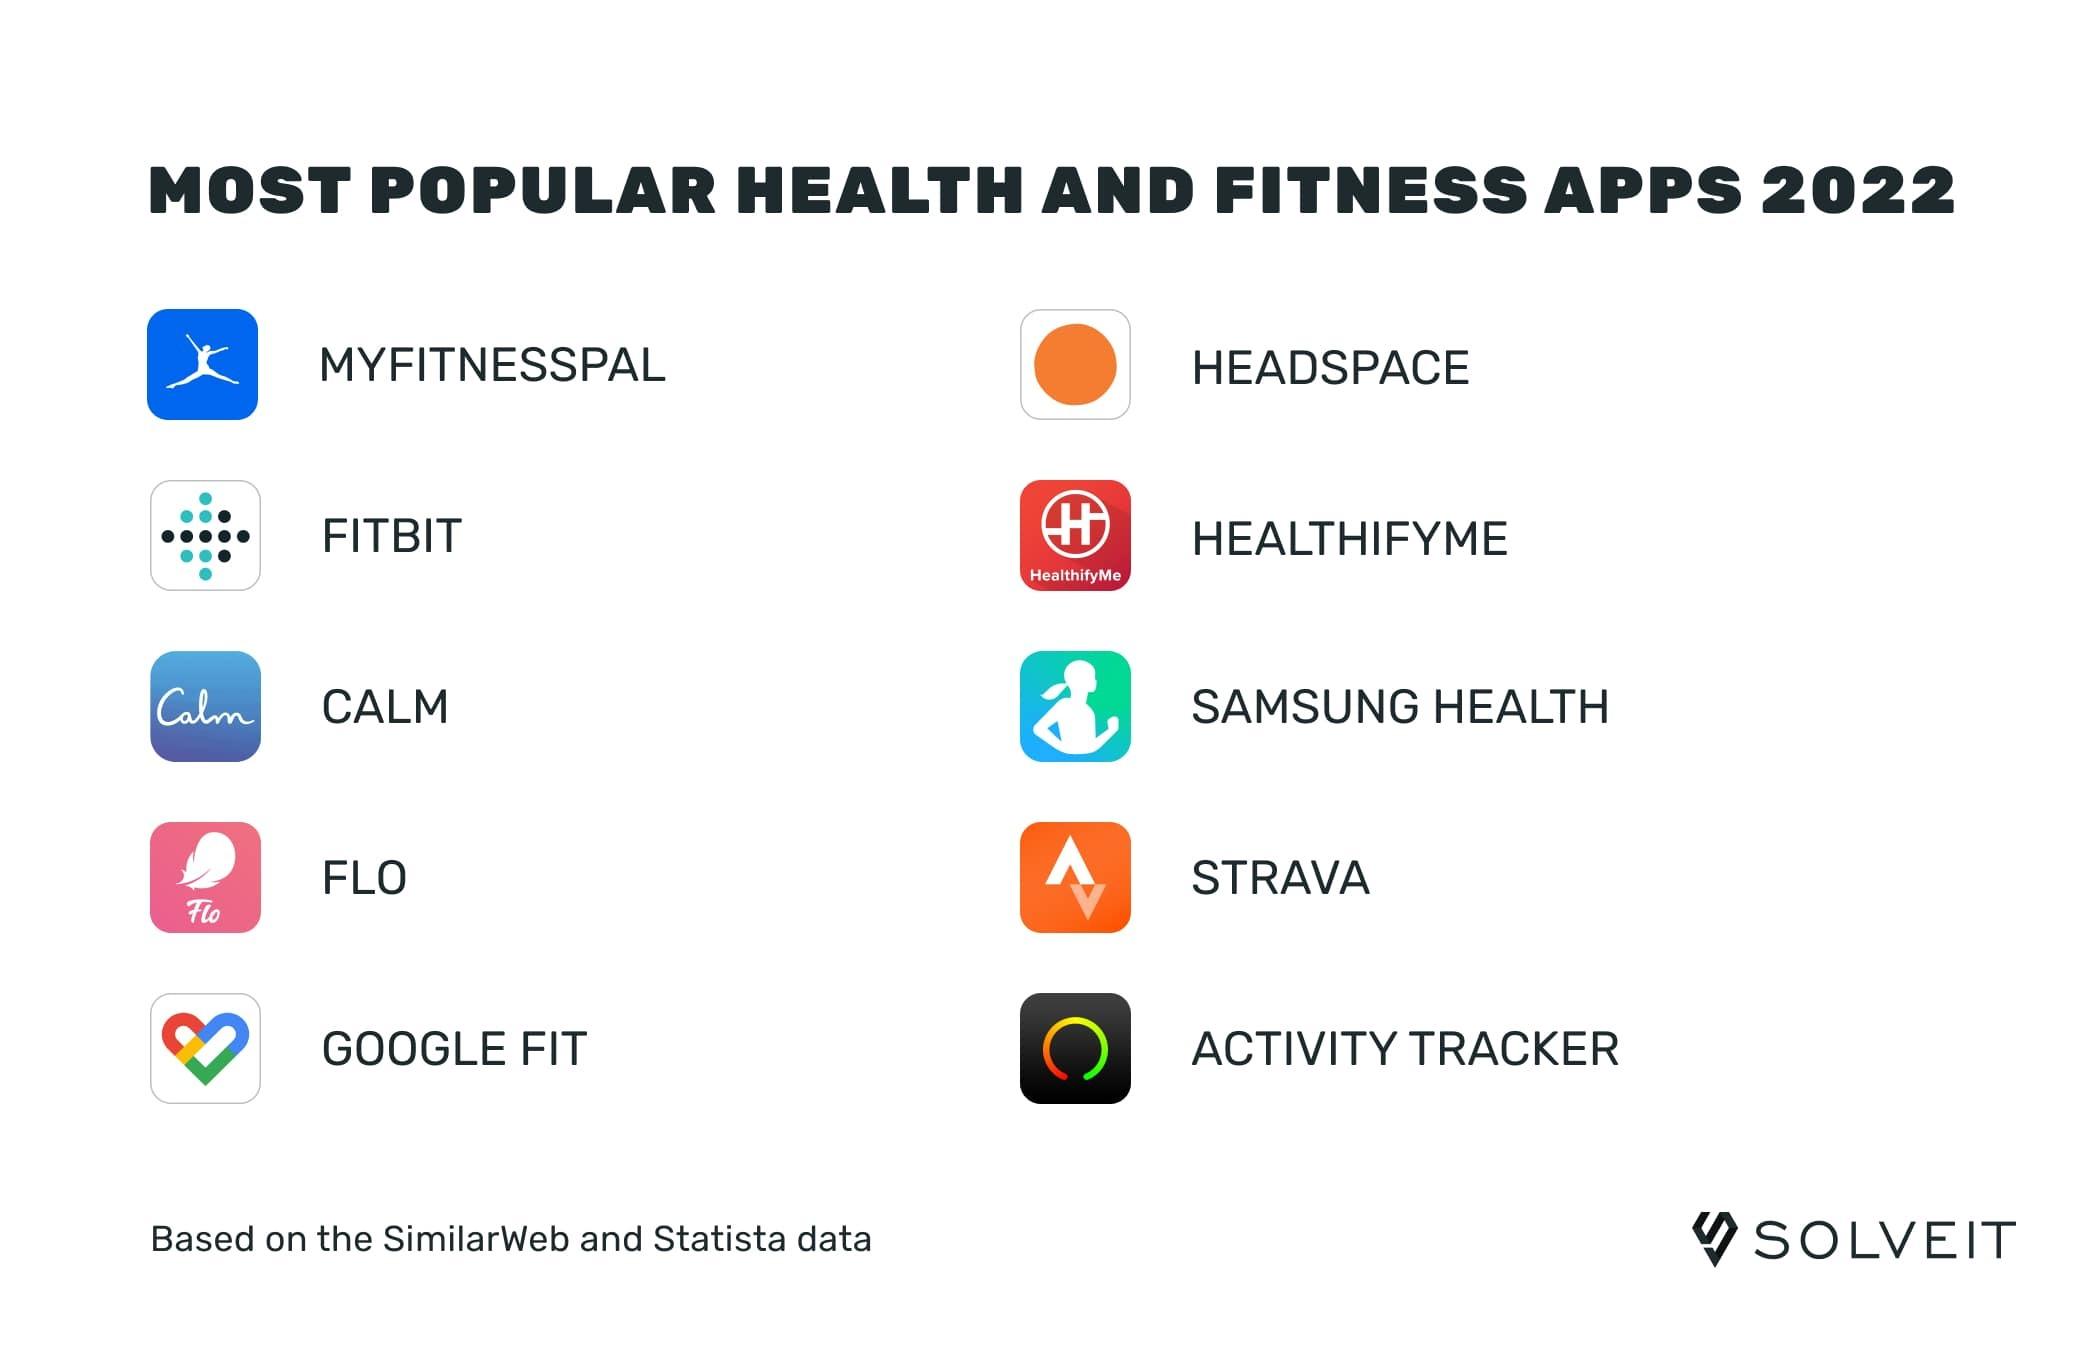 Top health and fitness apps 2022